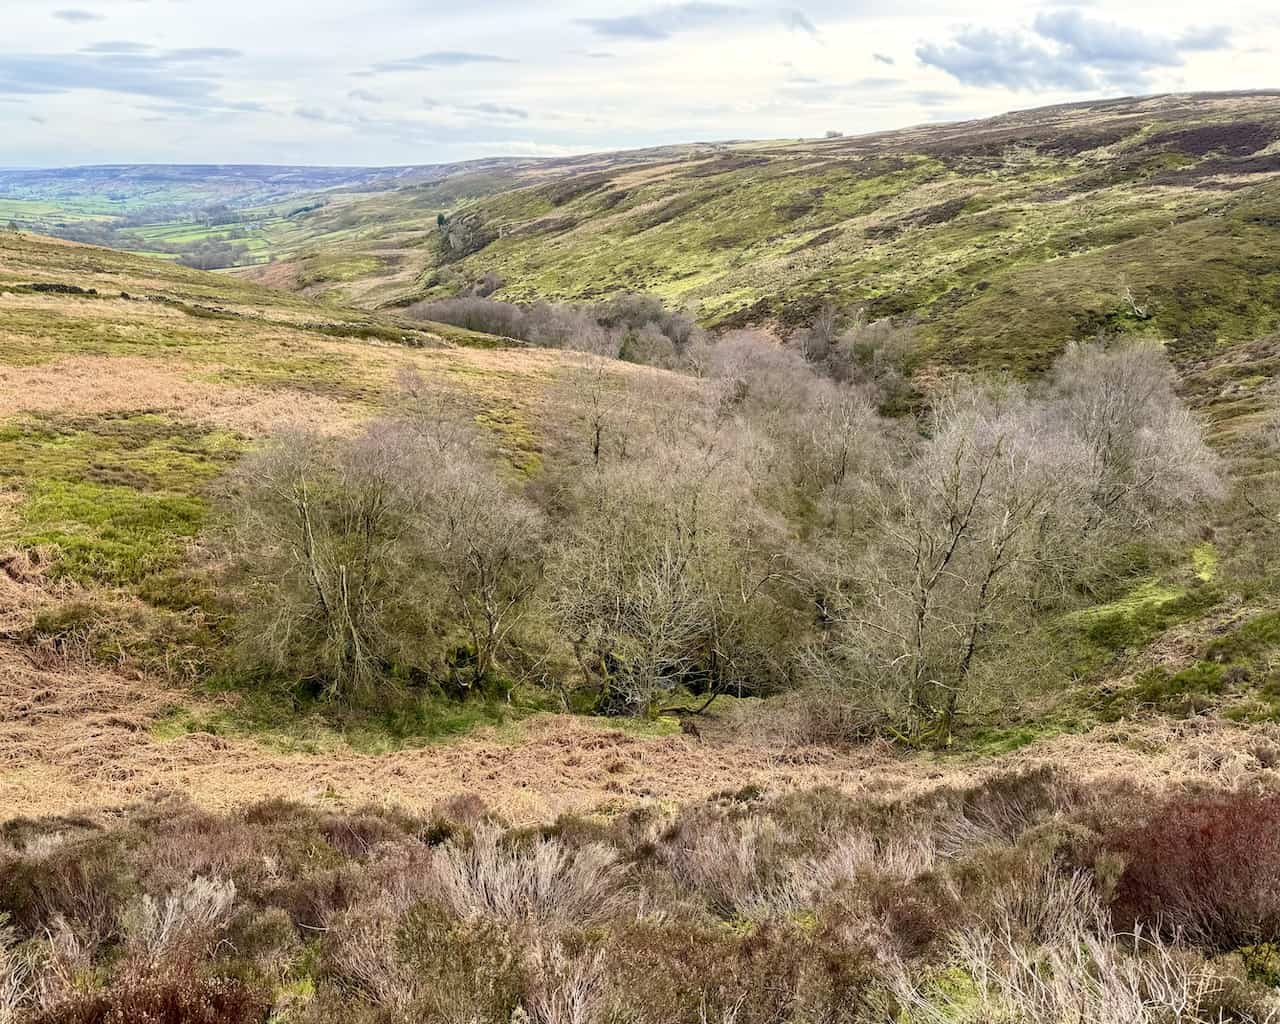 The Rosedale valley panorama from the railway's northernmost point, a breathtaking moment along the walk.
